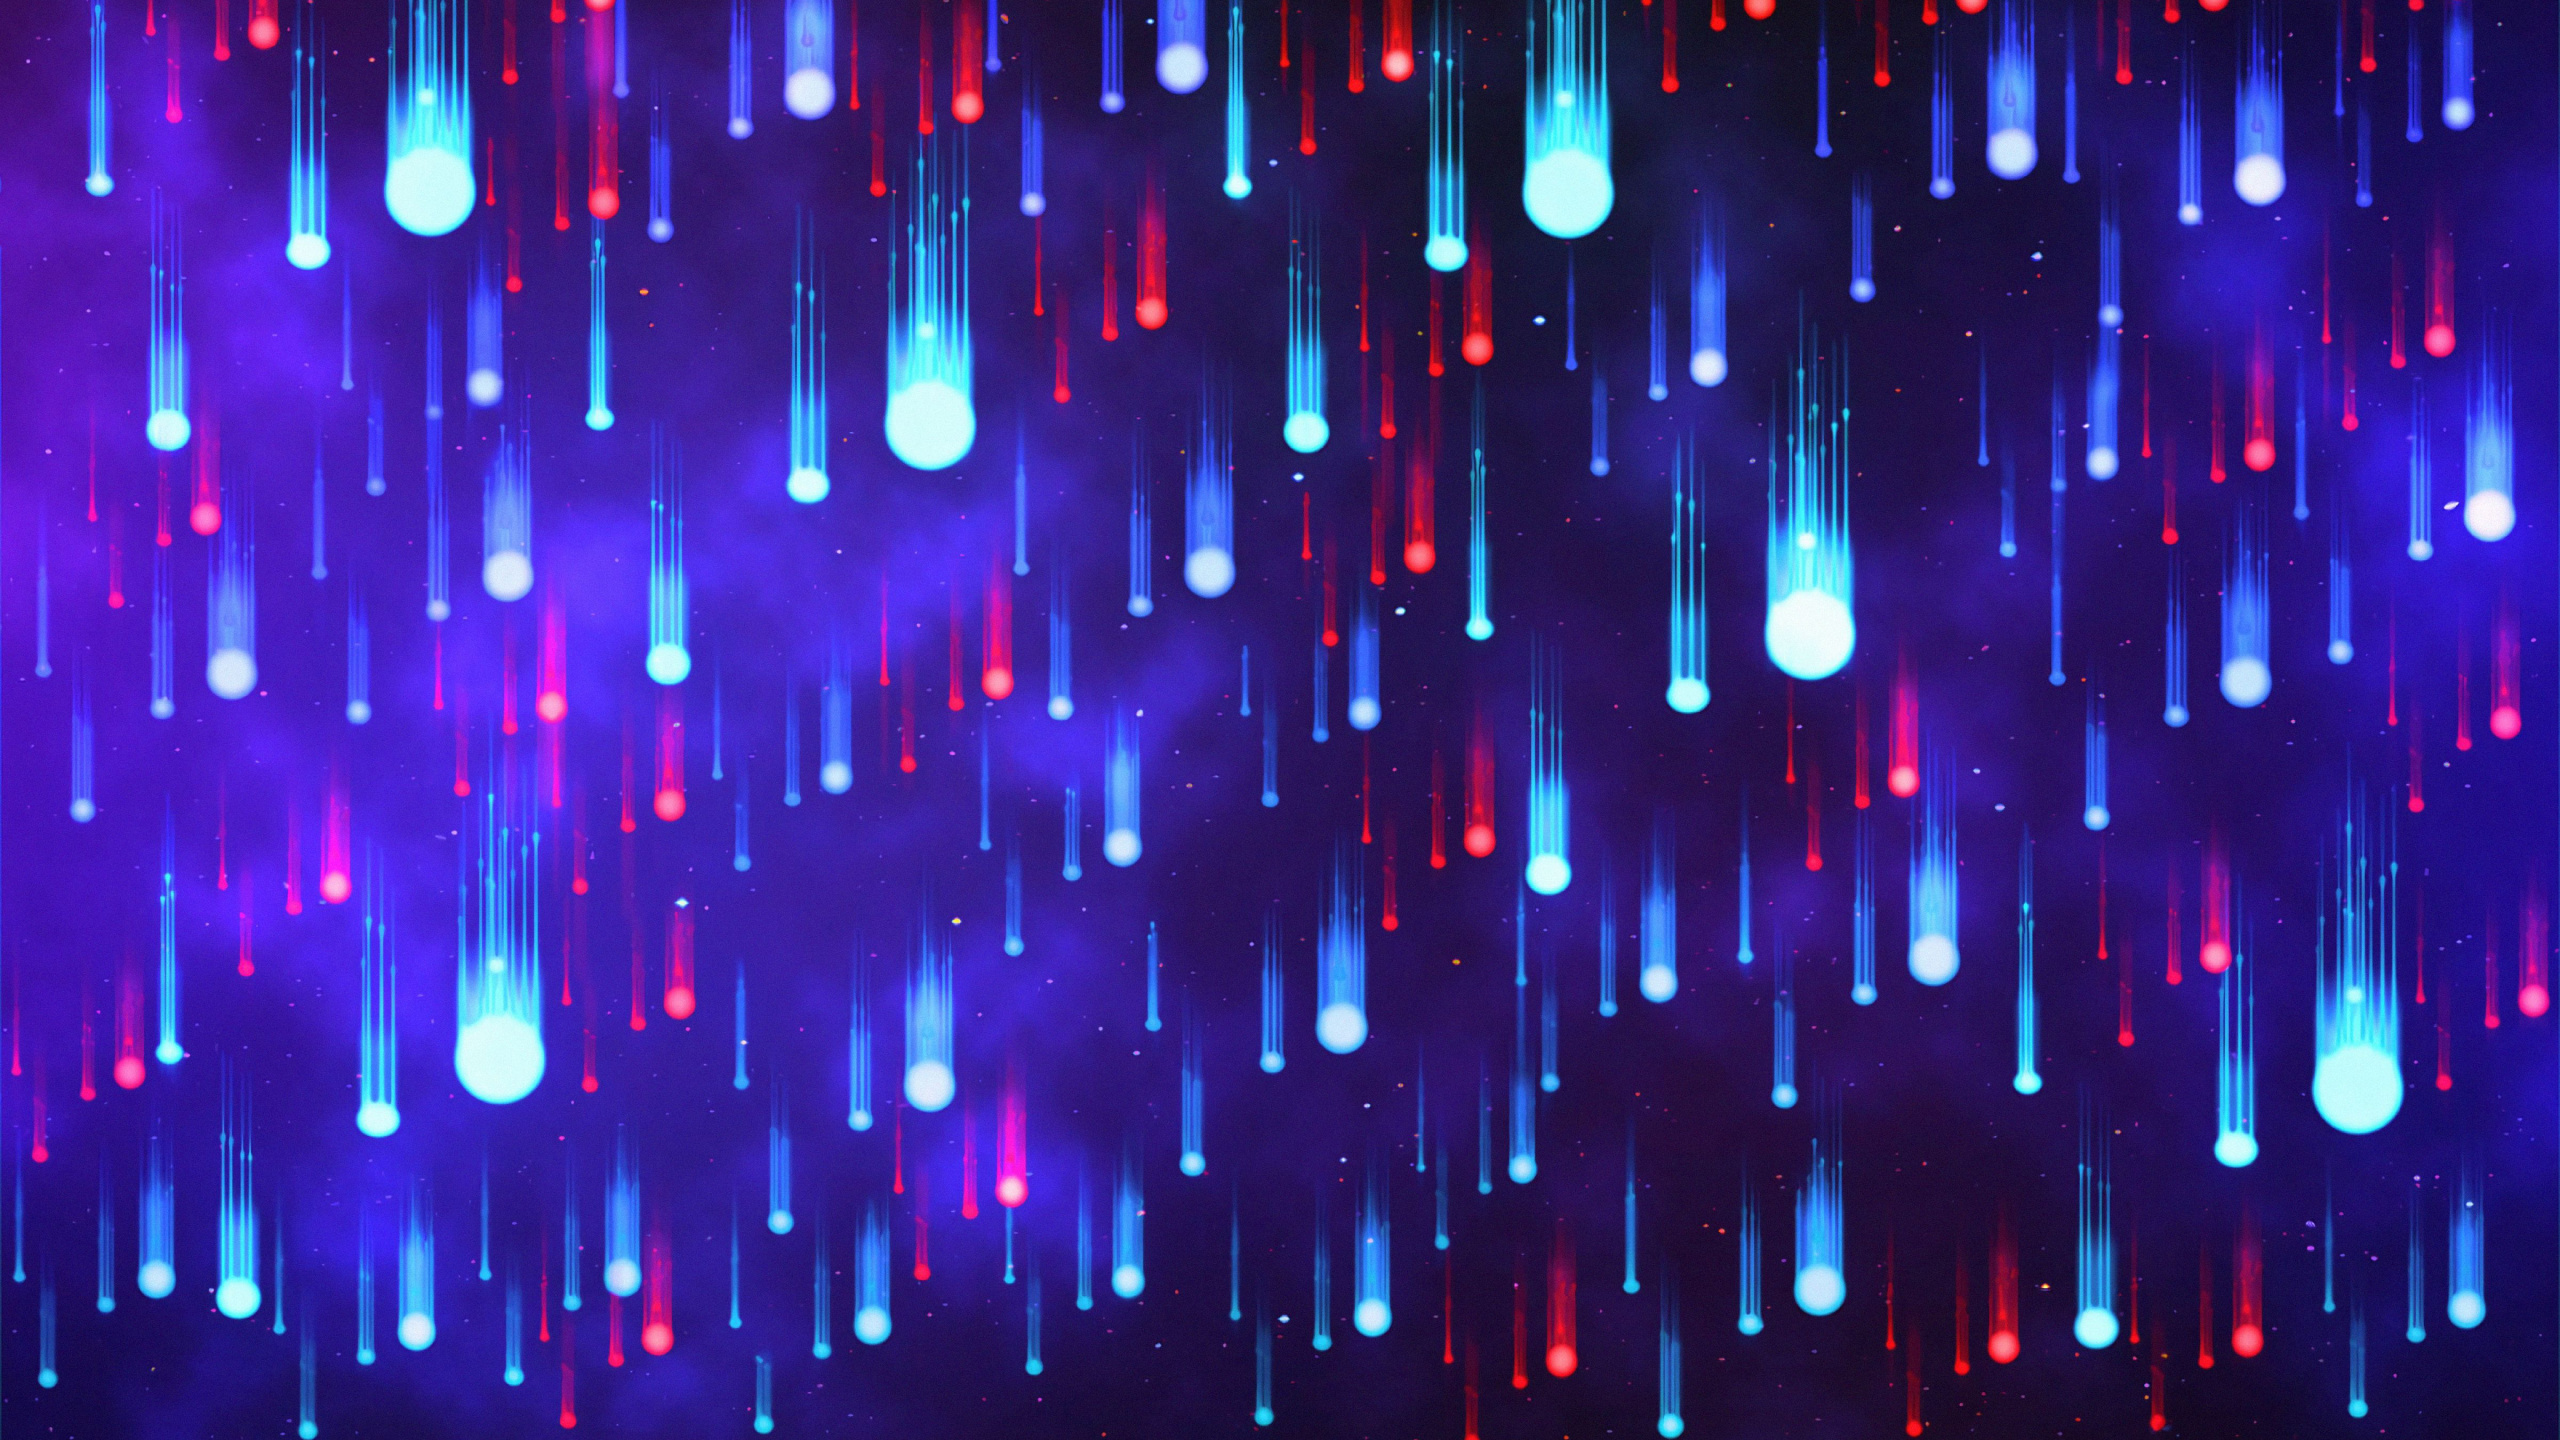 Pink and Blue Lights on a Dark Room. Wallpaper in 2560x1440 Resolution